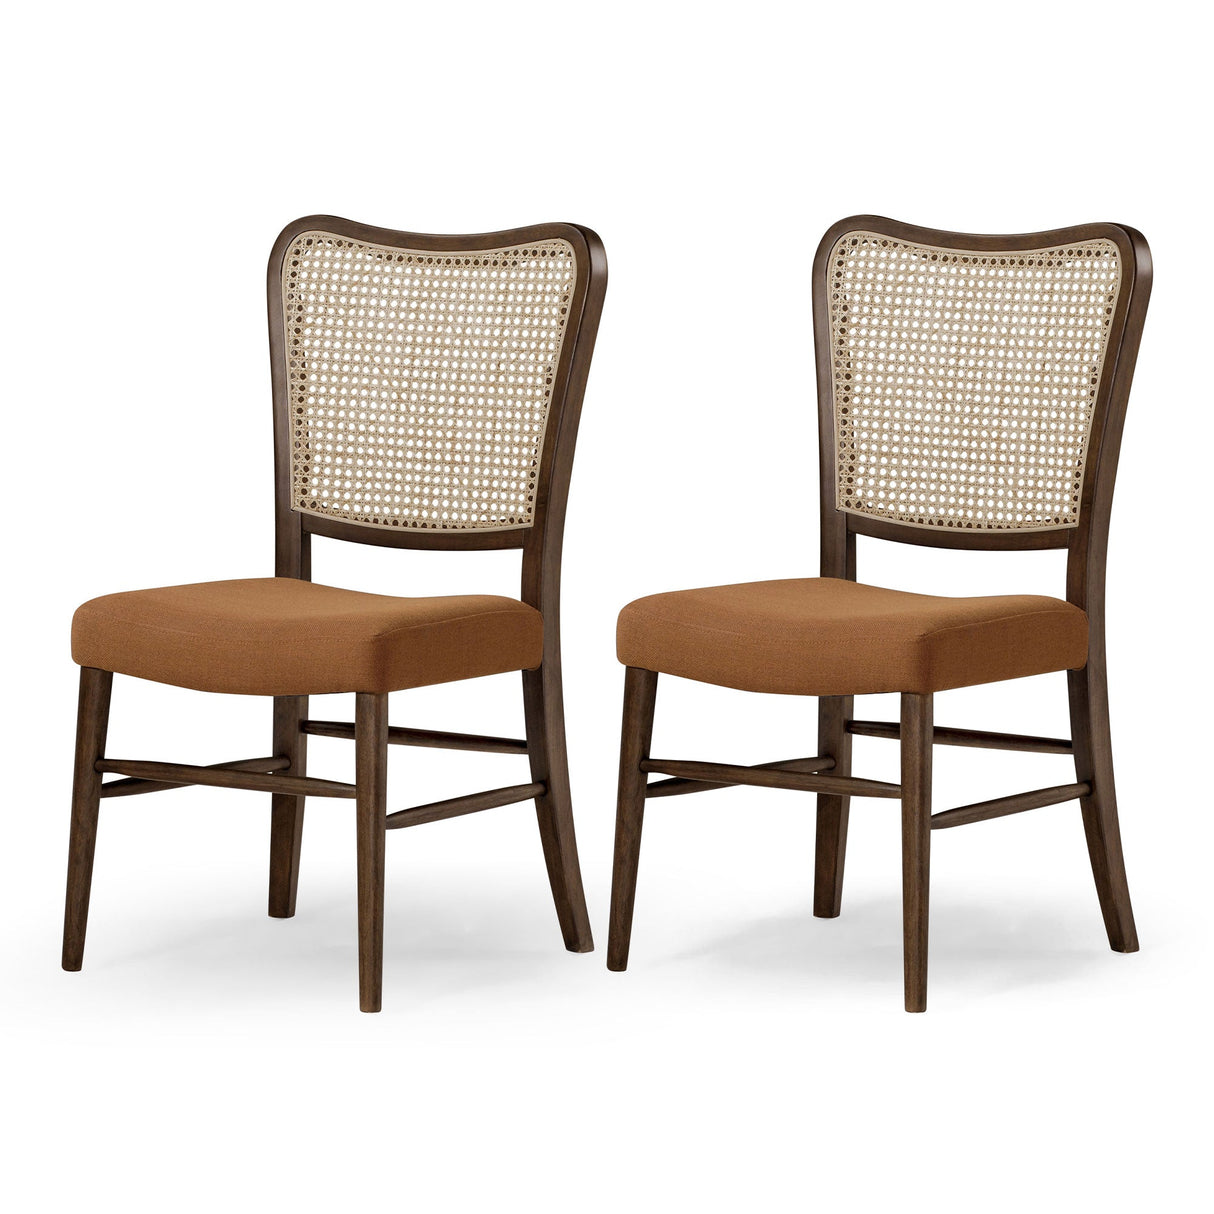 Maven Lane Vera Wood Dining Chair, Antique Brown & Clay Canvas Fabric, Set of 2